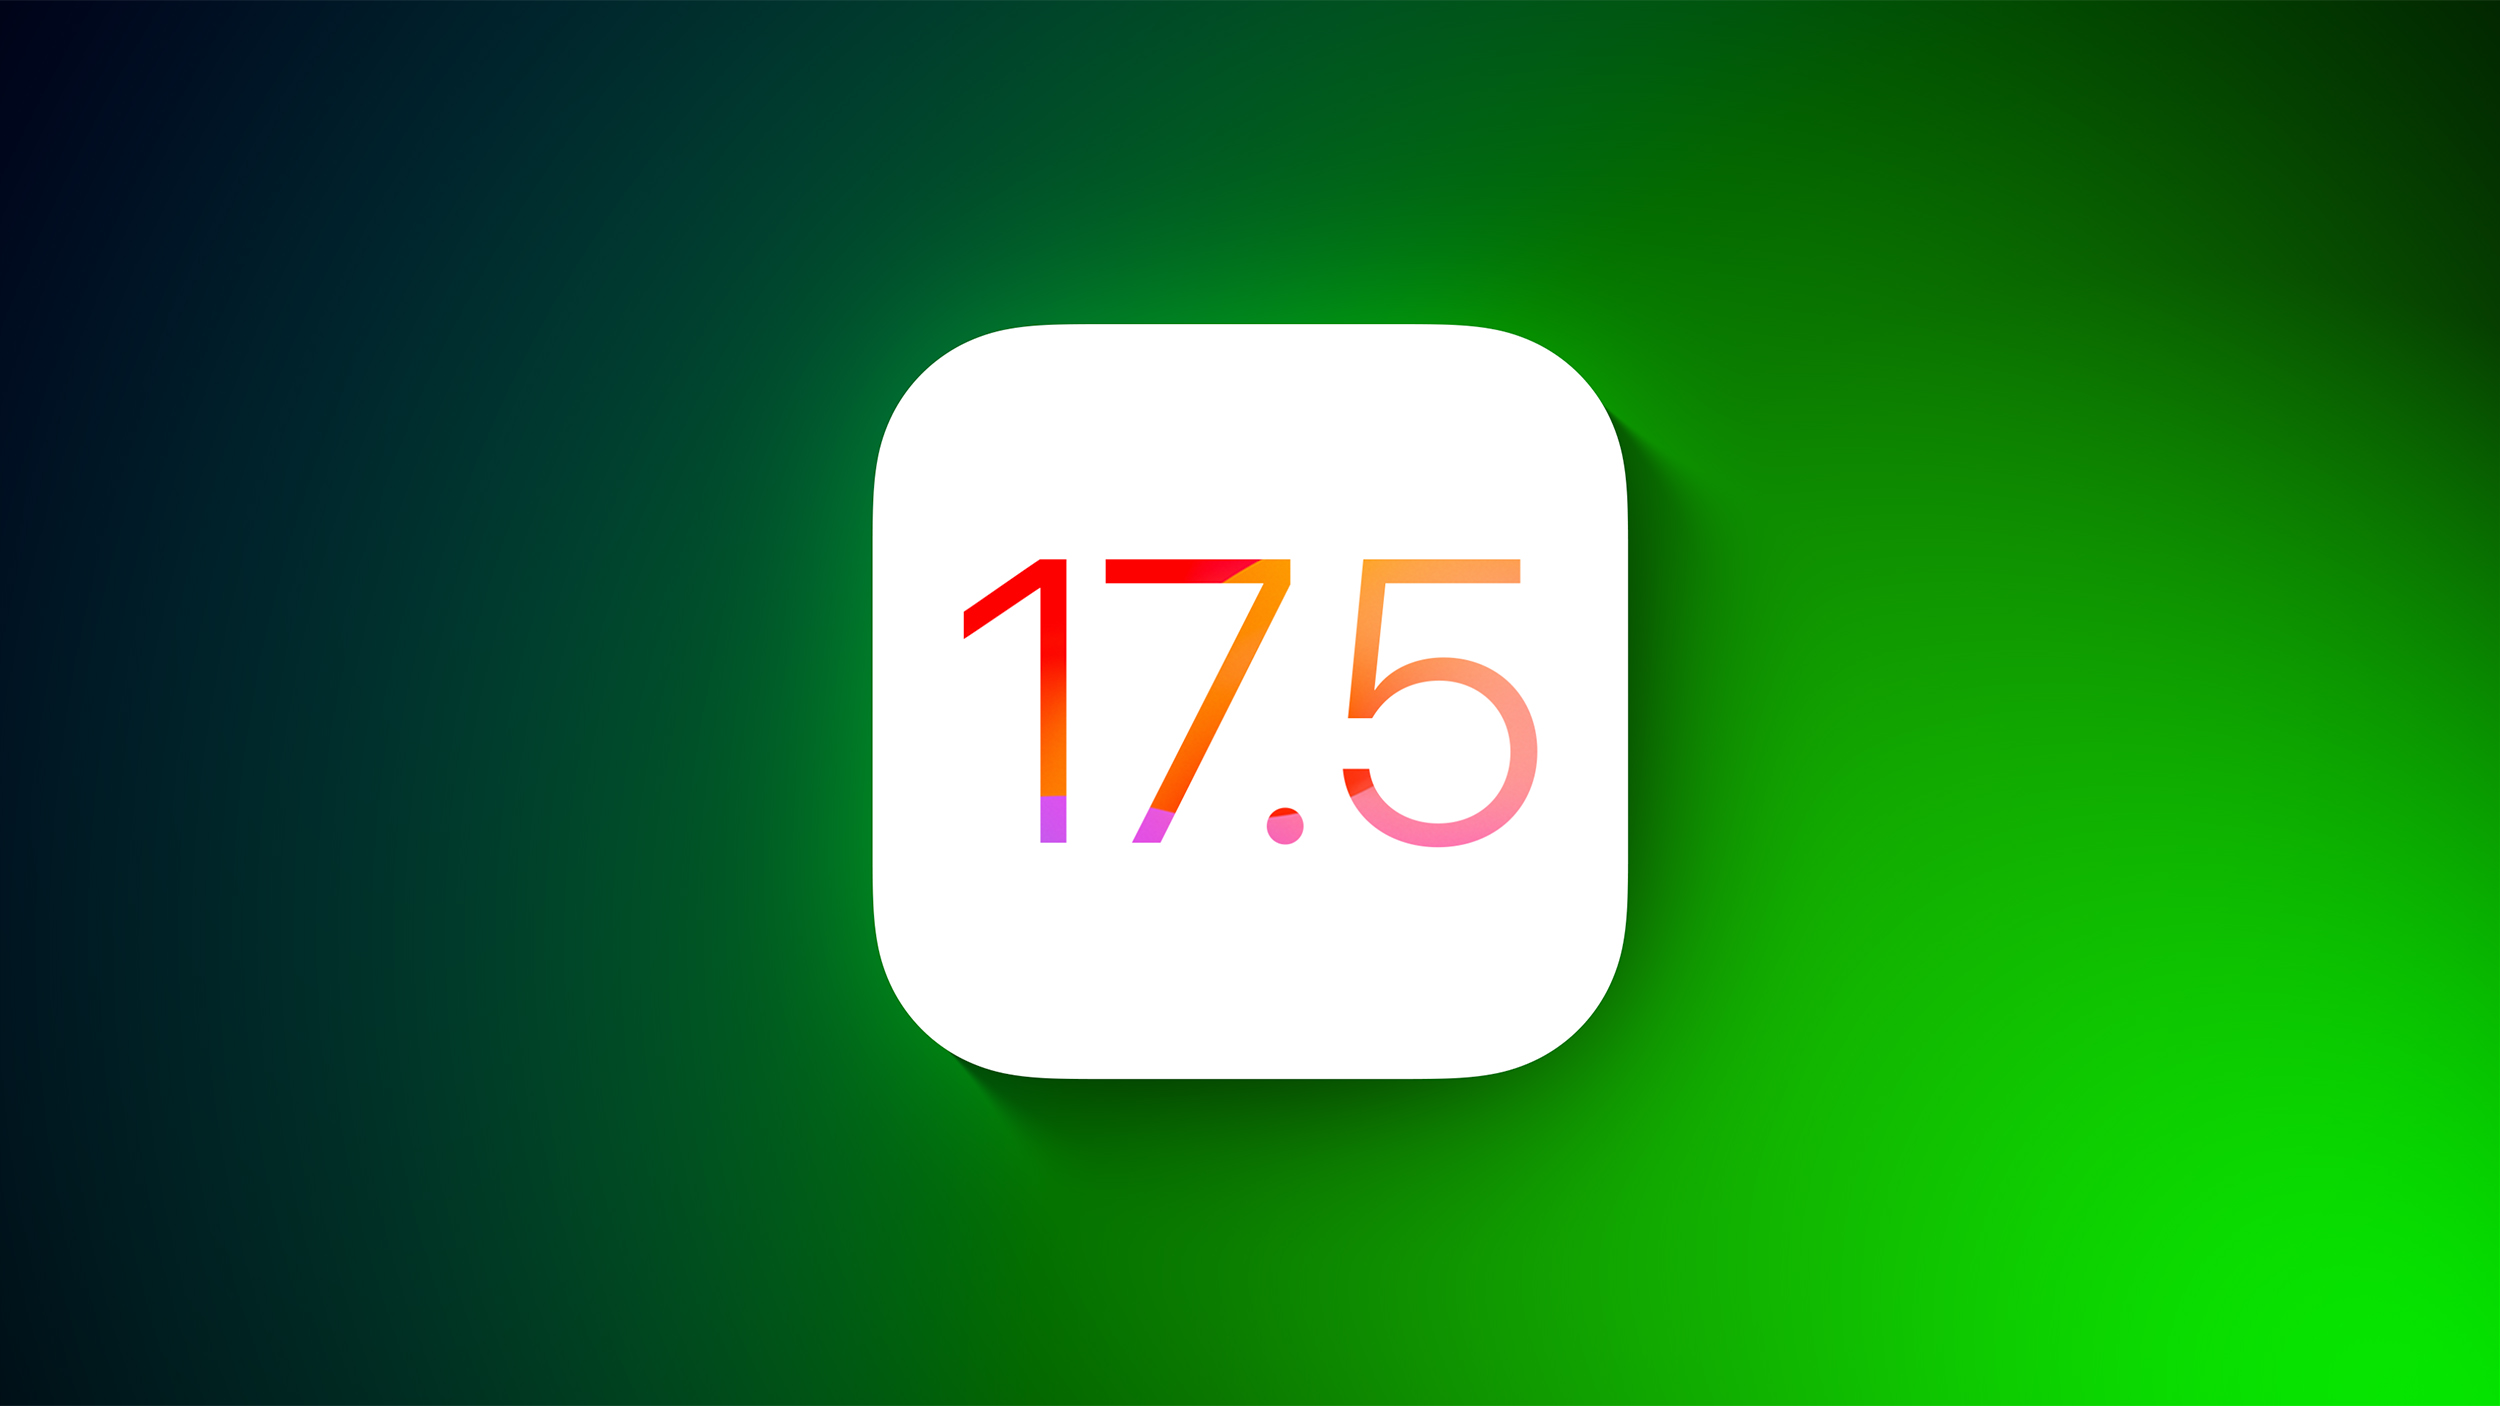 Apple Releases iOS 17.5 With Cross-Platform Tracking Detection, EU App Downloads From Websites and More